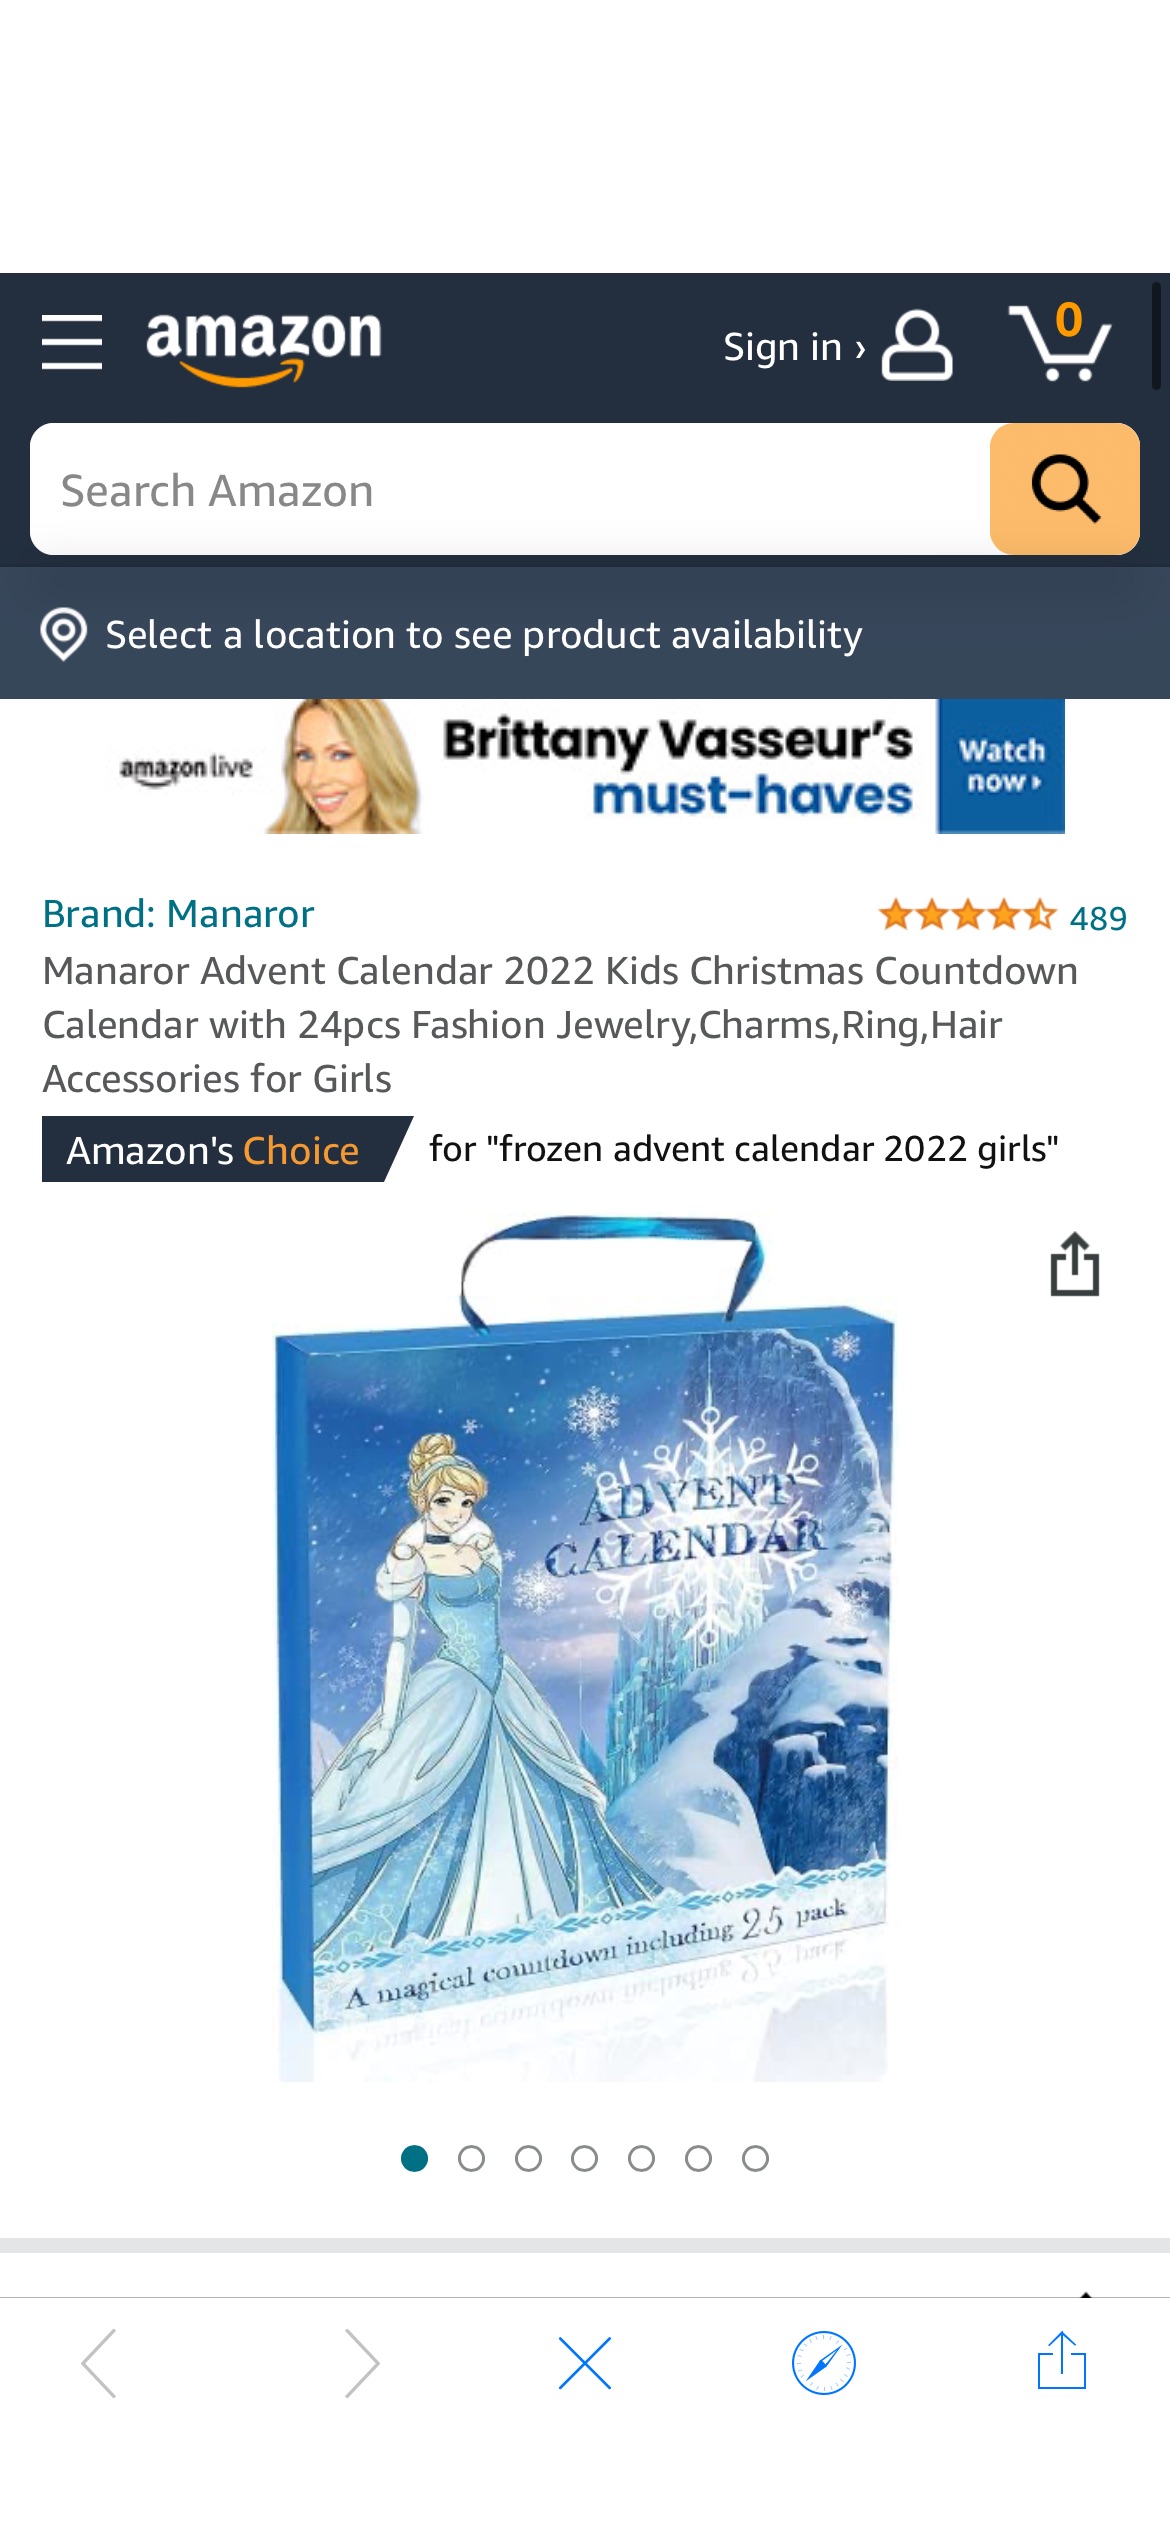 Amazon.com: Manaror Advent Calendar 2022 Kids Christmas 圣诞Countdown Calendar with 24pcs Fashion Jewelry,Charms,Ring,Hair Accessories for Girls : Everything Else